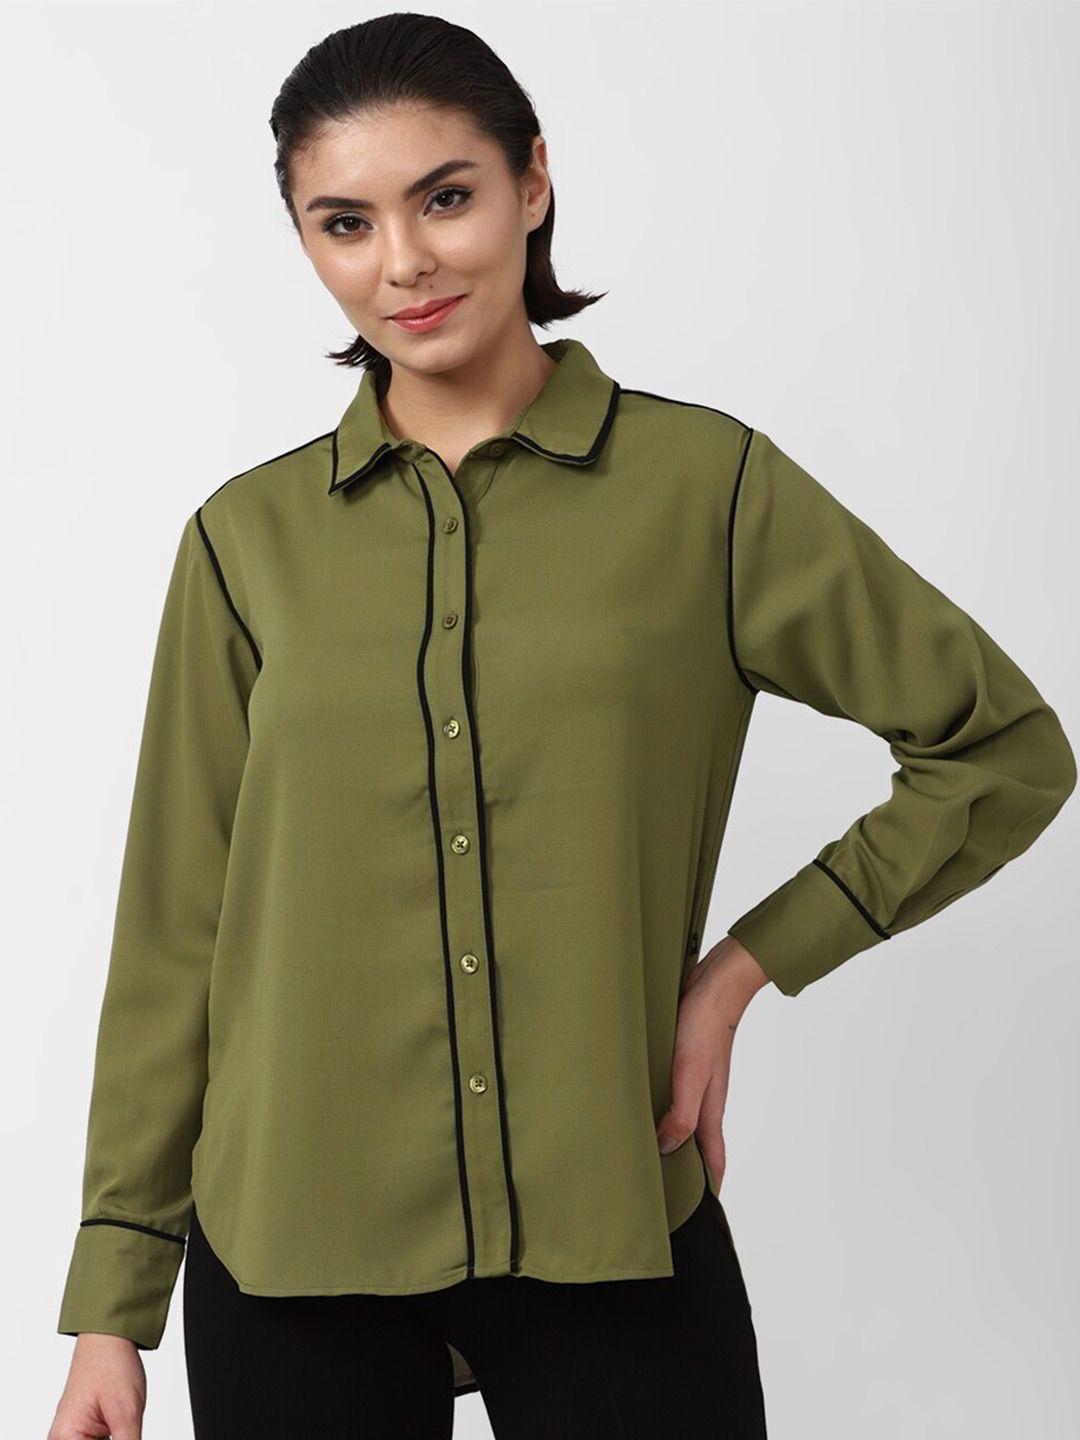 FOREVER 21 Women Olive Green Solid Casual Shirt